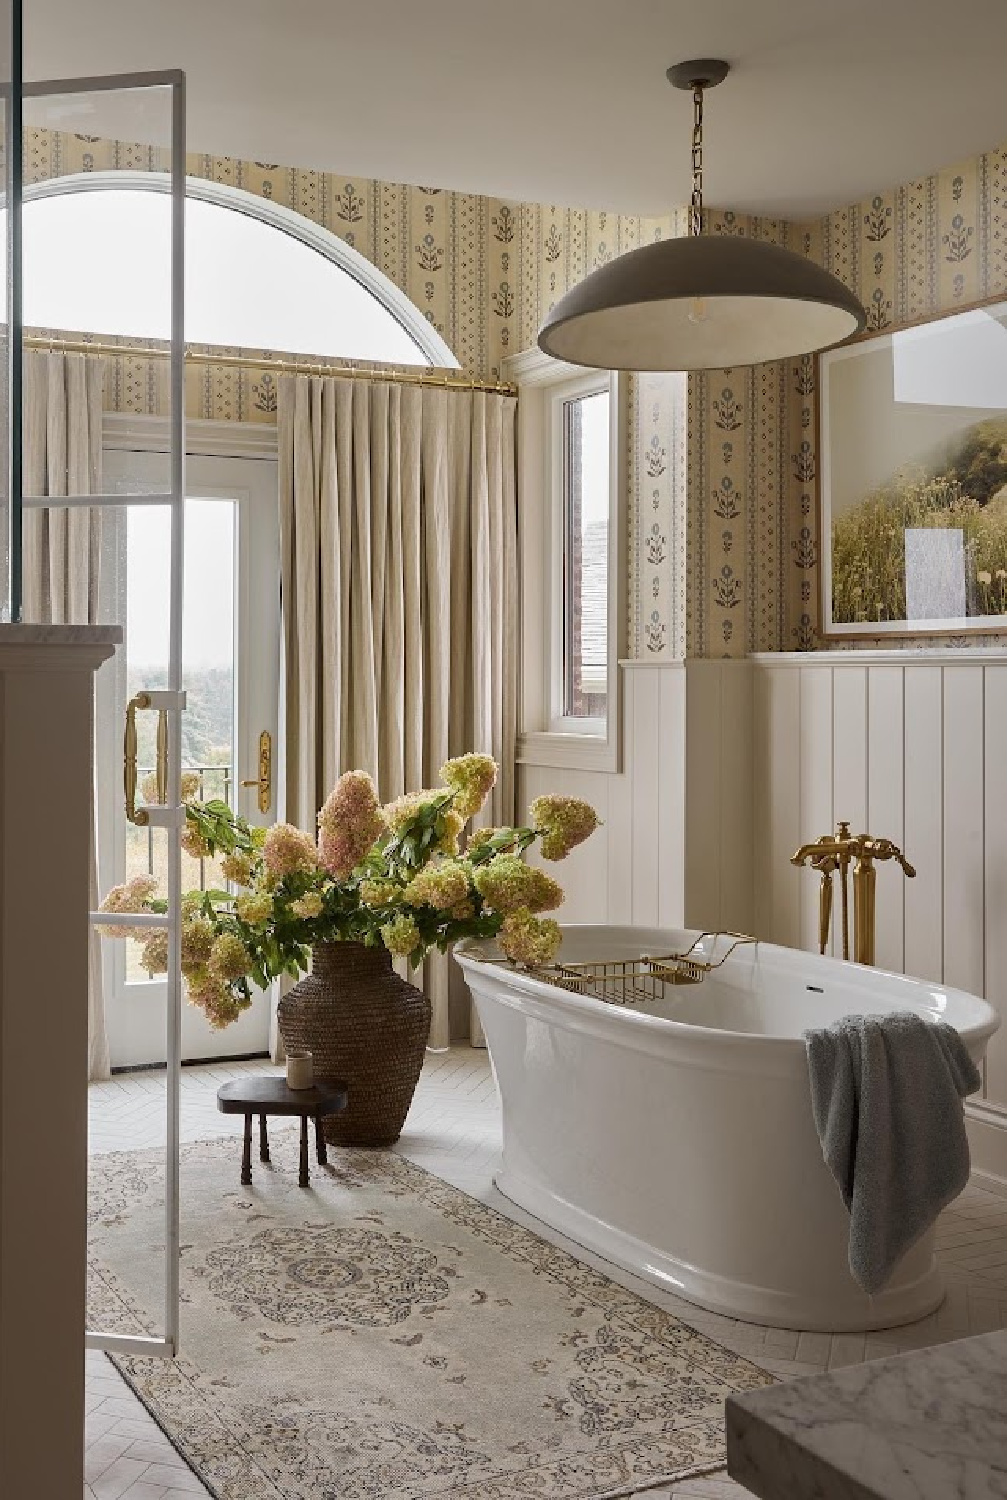 Tongue and groove paneling in a classic bath design with soaking tub and abundant natural light.